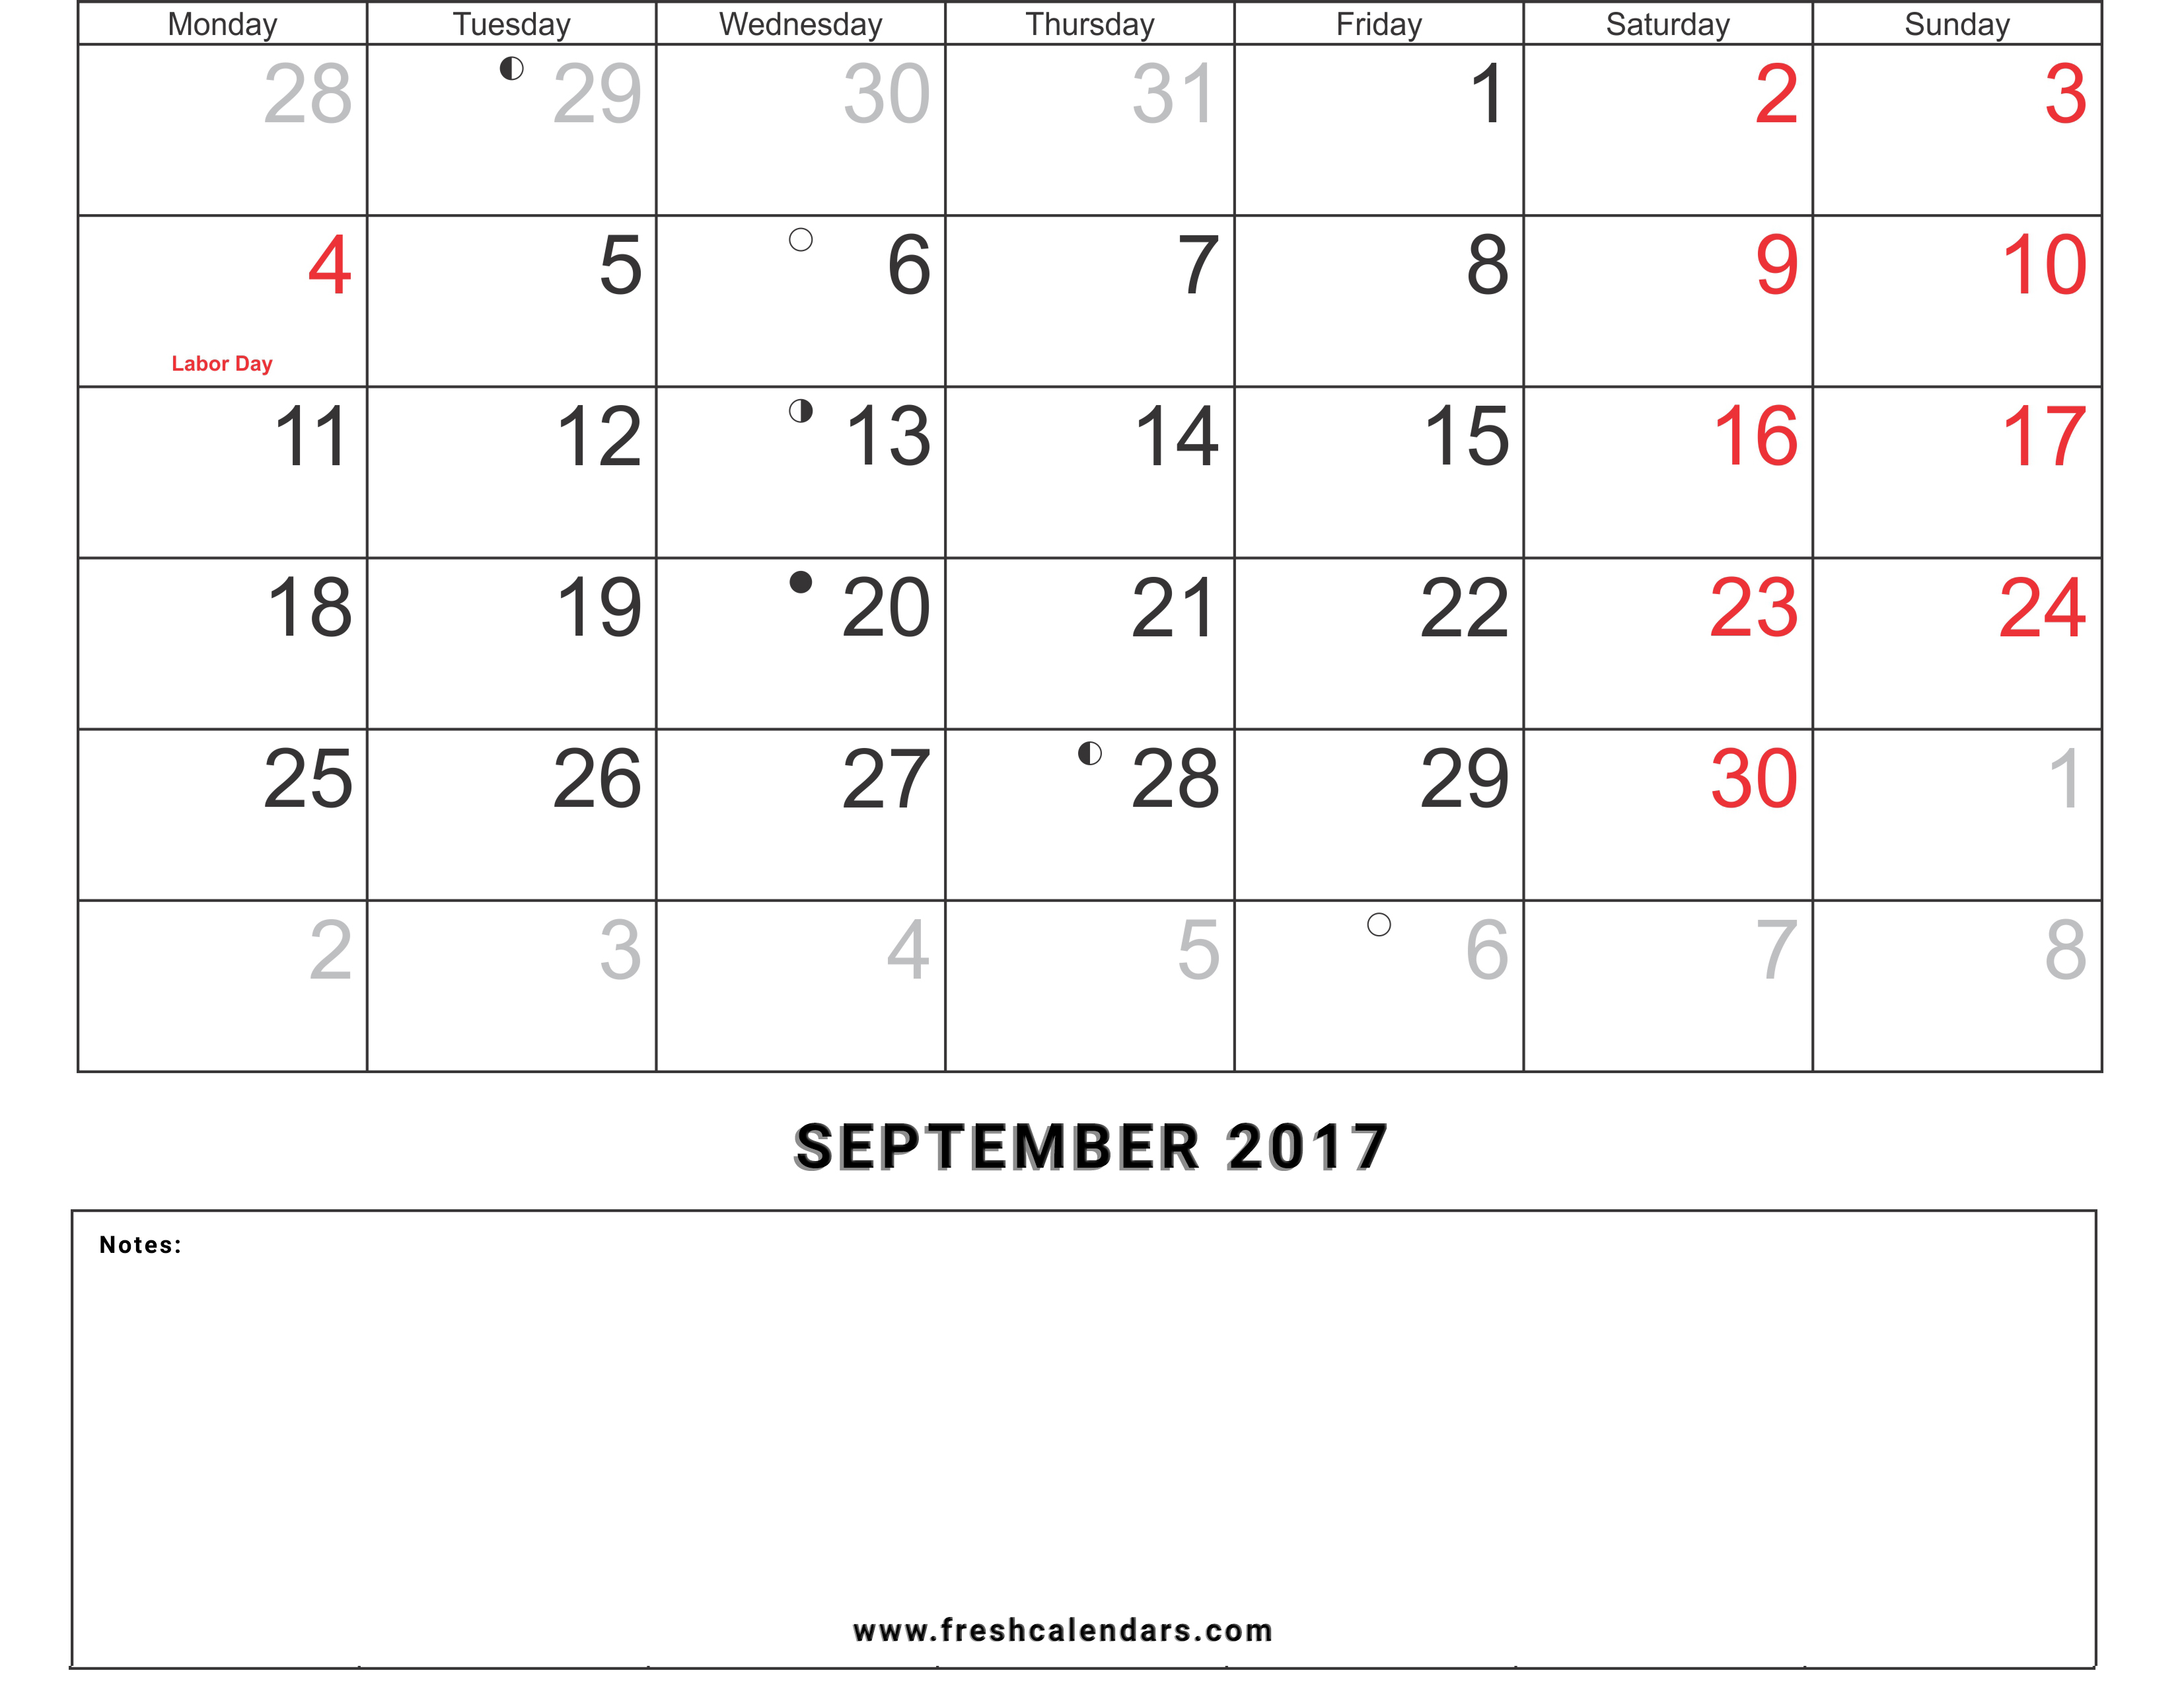 2017 September Calendar With Holidays Daylight Savings and Notes